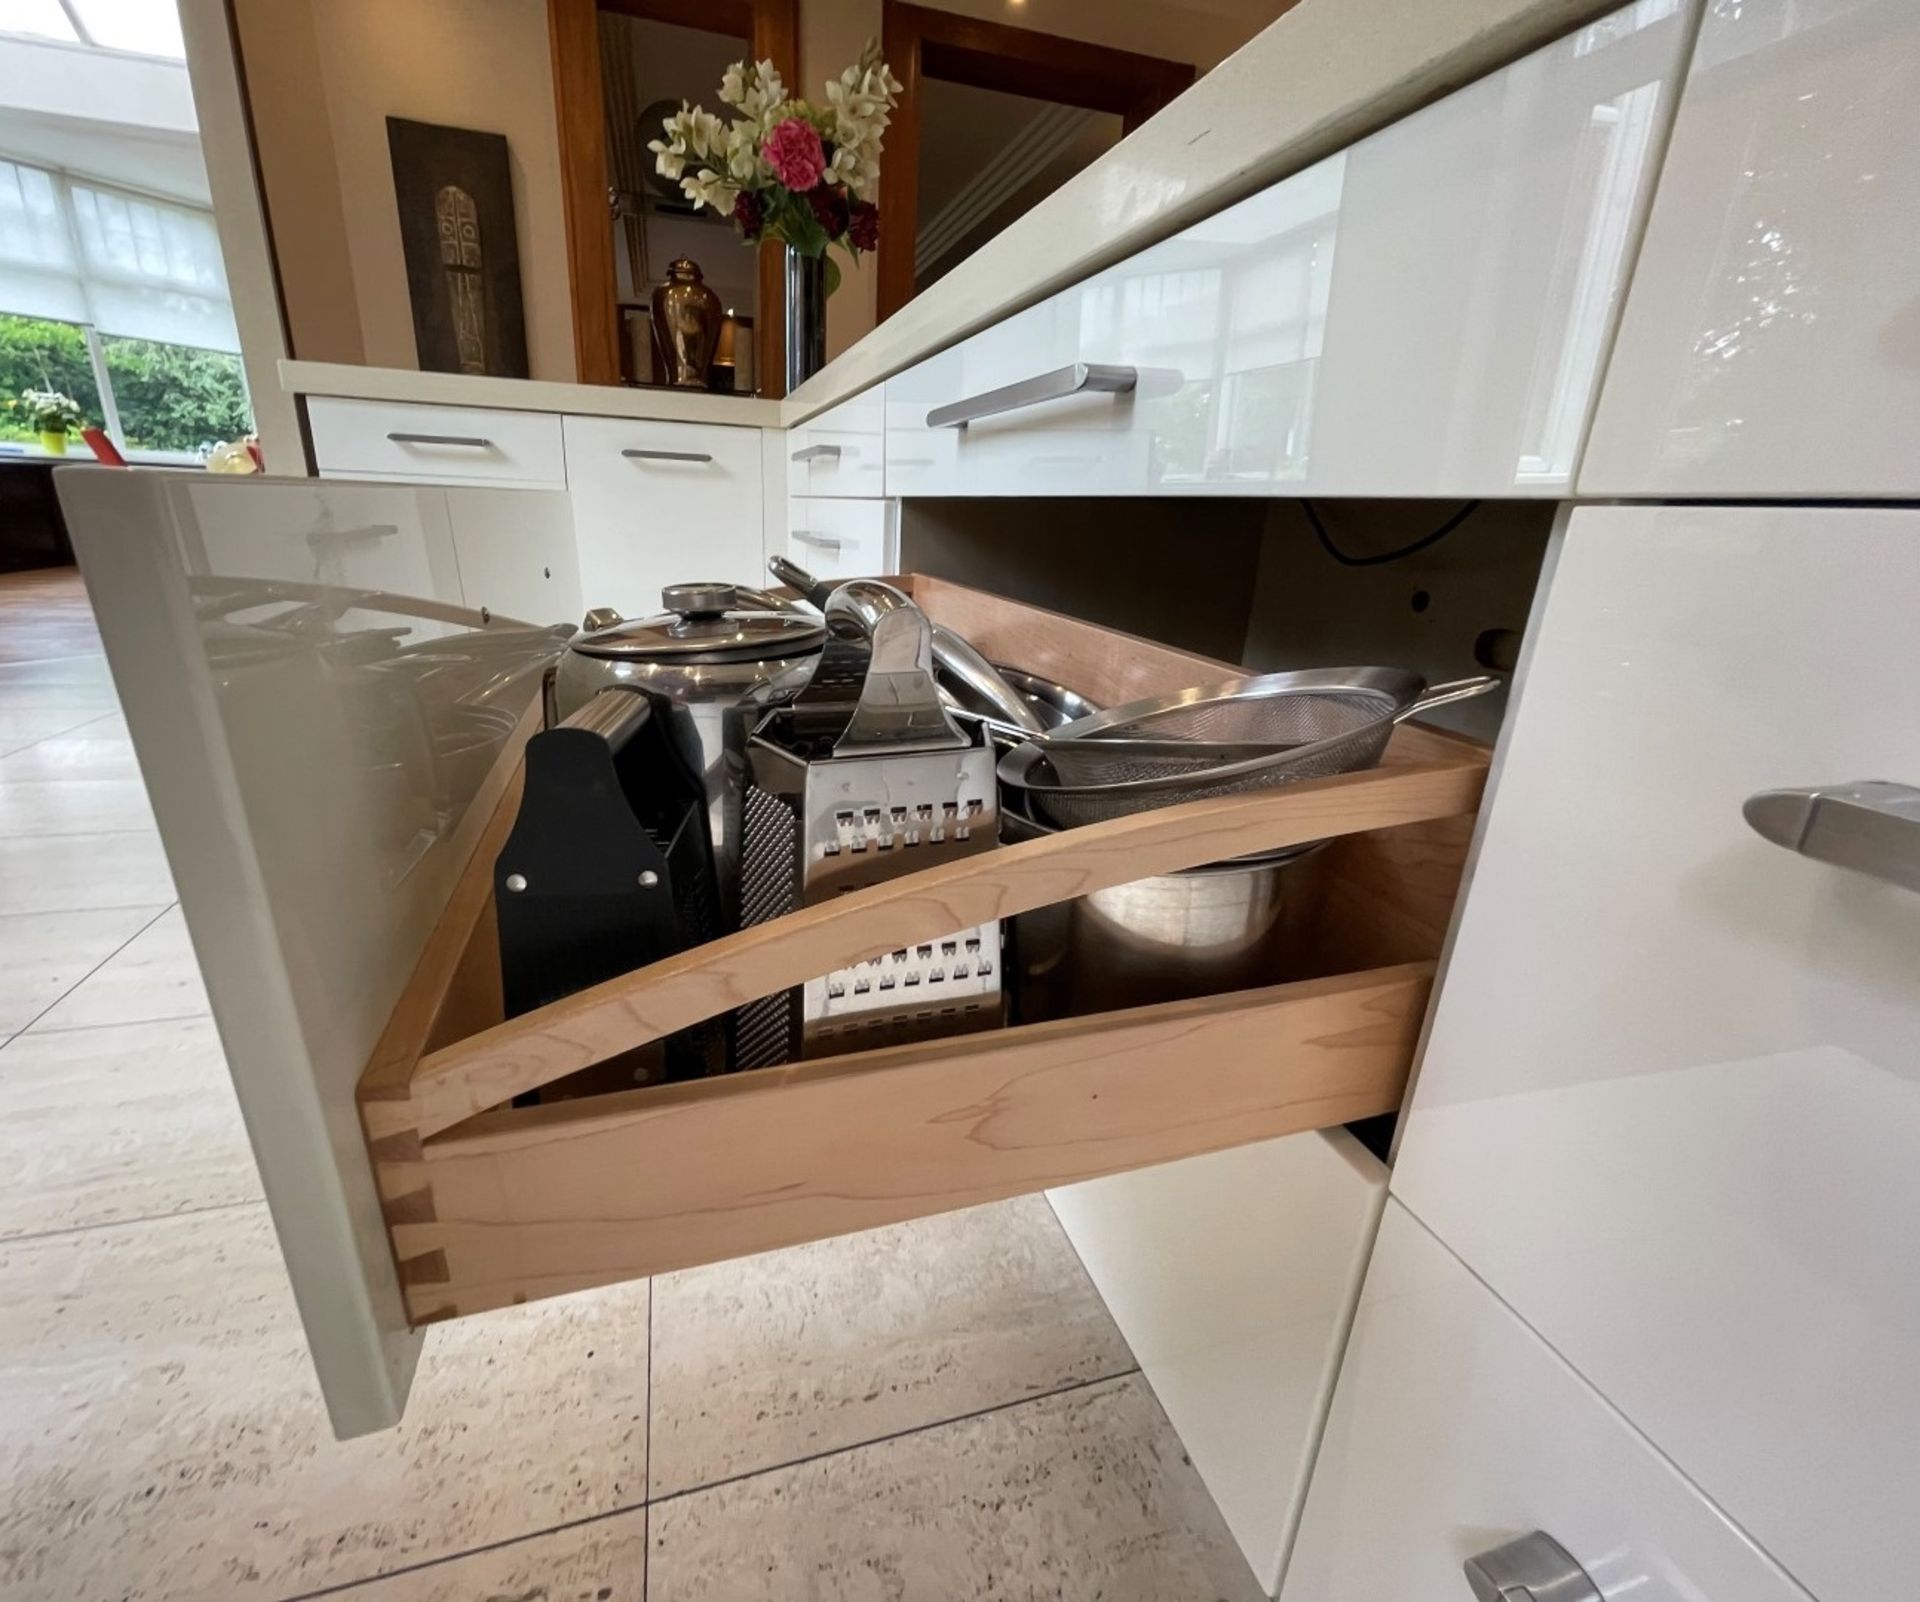 1 x Bespoke Fitted Mowlem & Co Kitchen With Miele, Wolf, and Sub Zero Appliances & Granite Worktops - Image 122 of 131